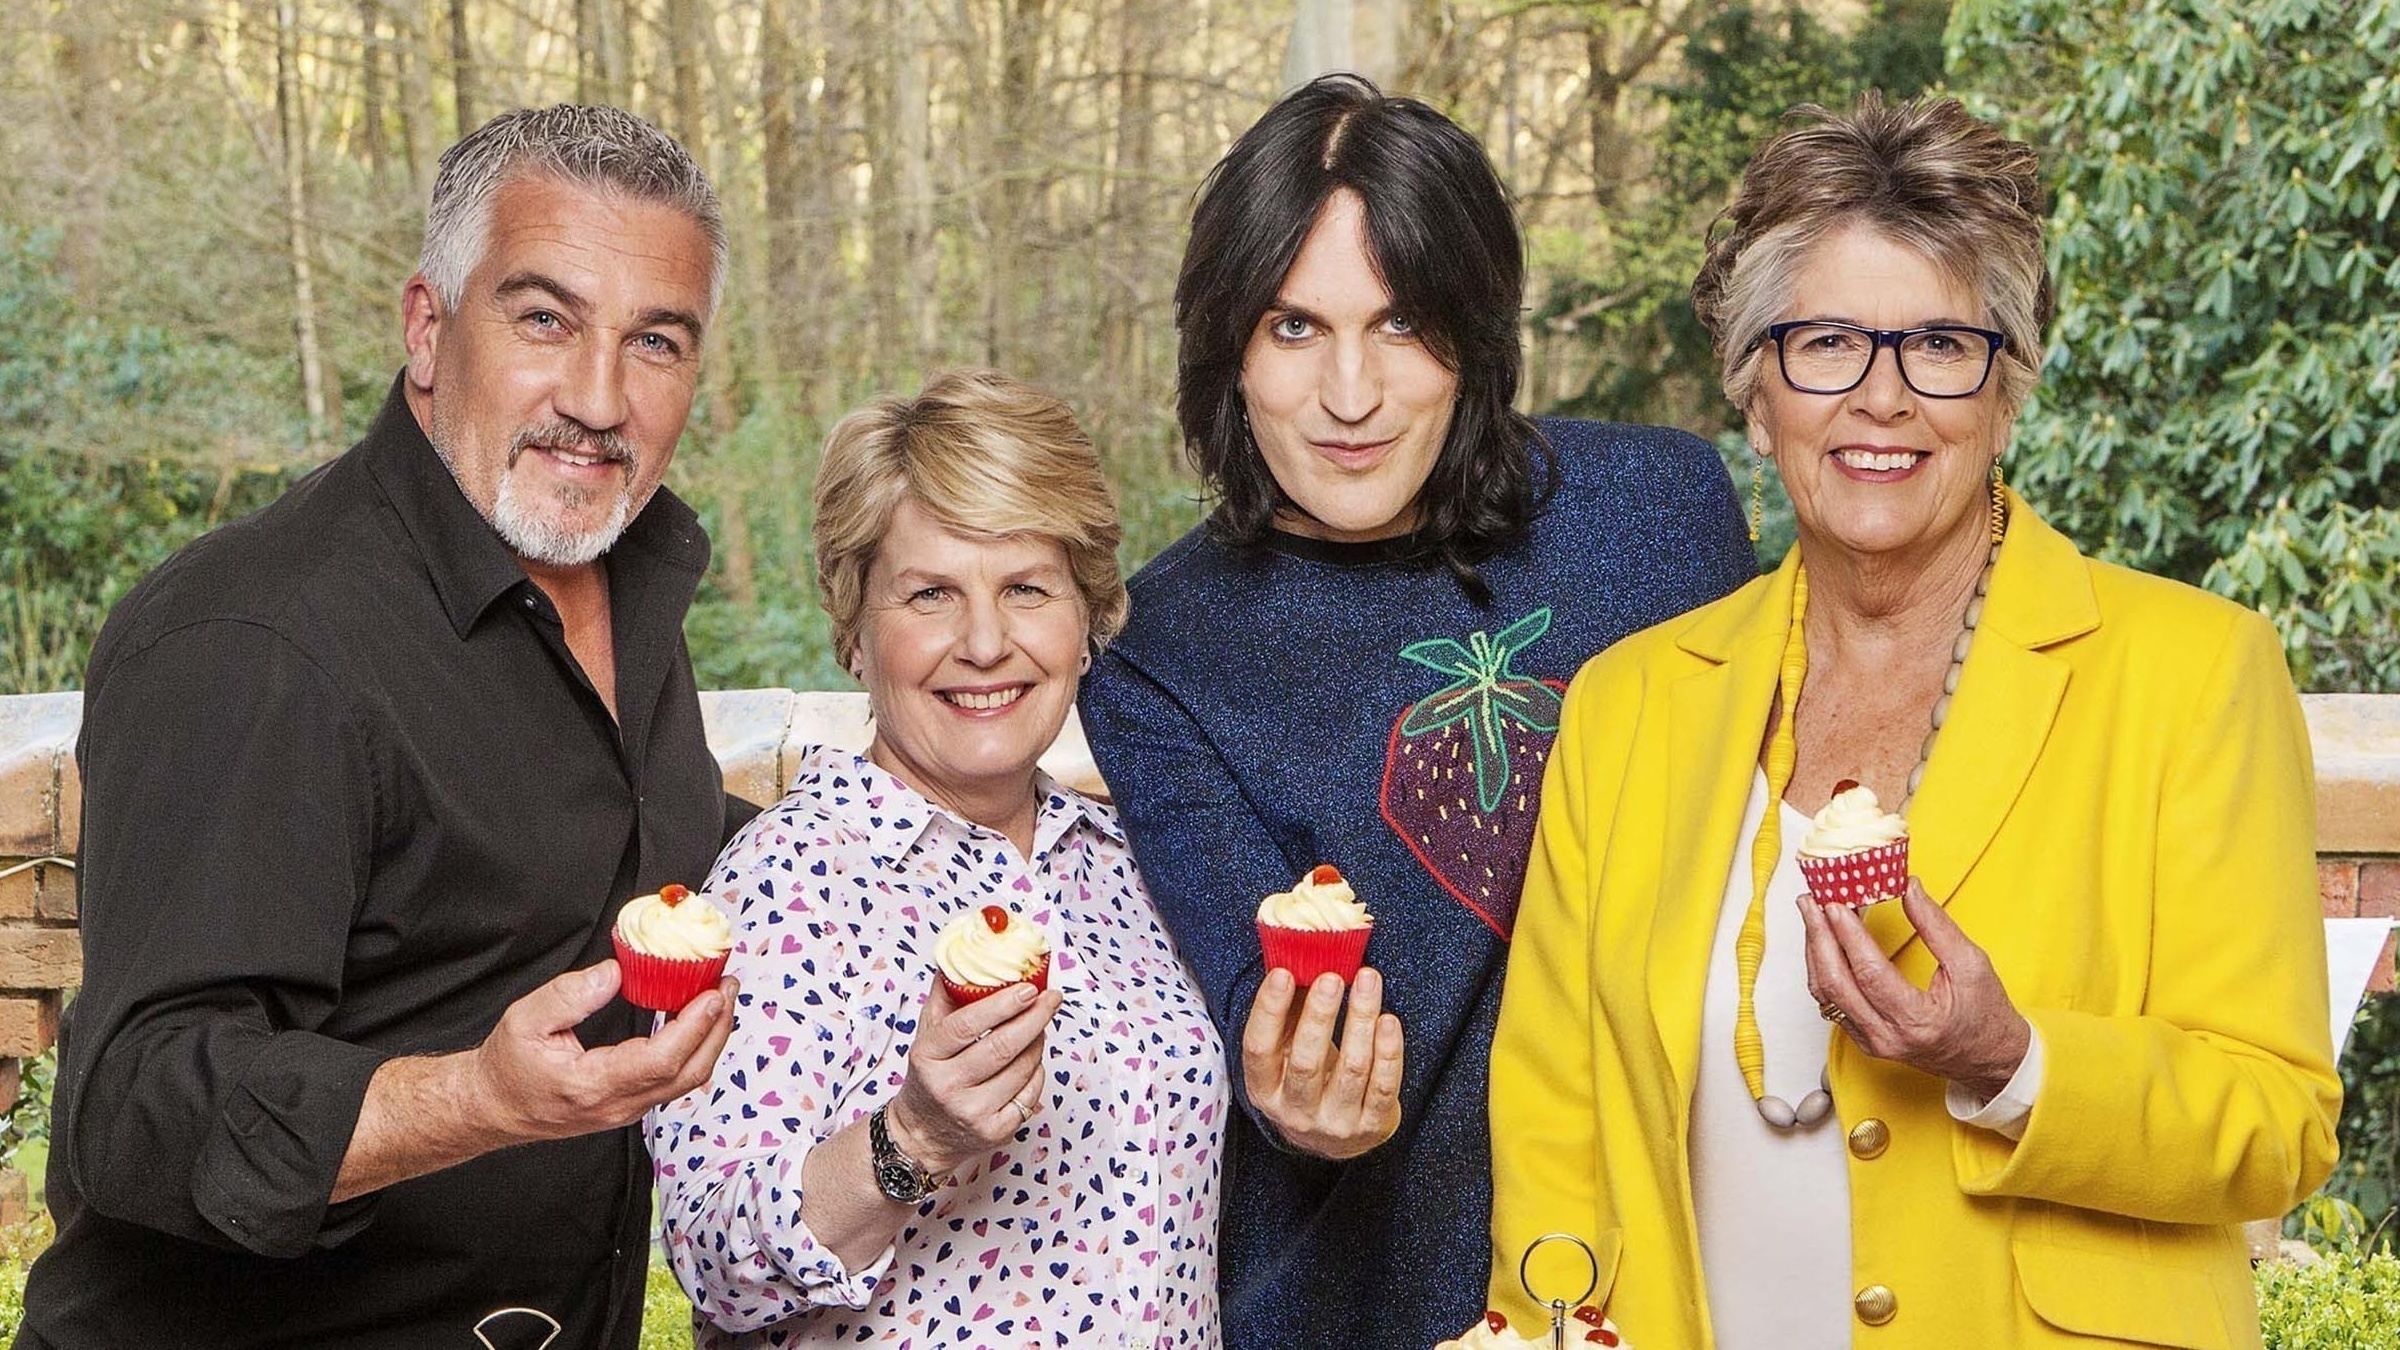 The new Bake Off line-up (Love Productions/Channel 4/Mark/Press Association Images)